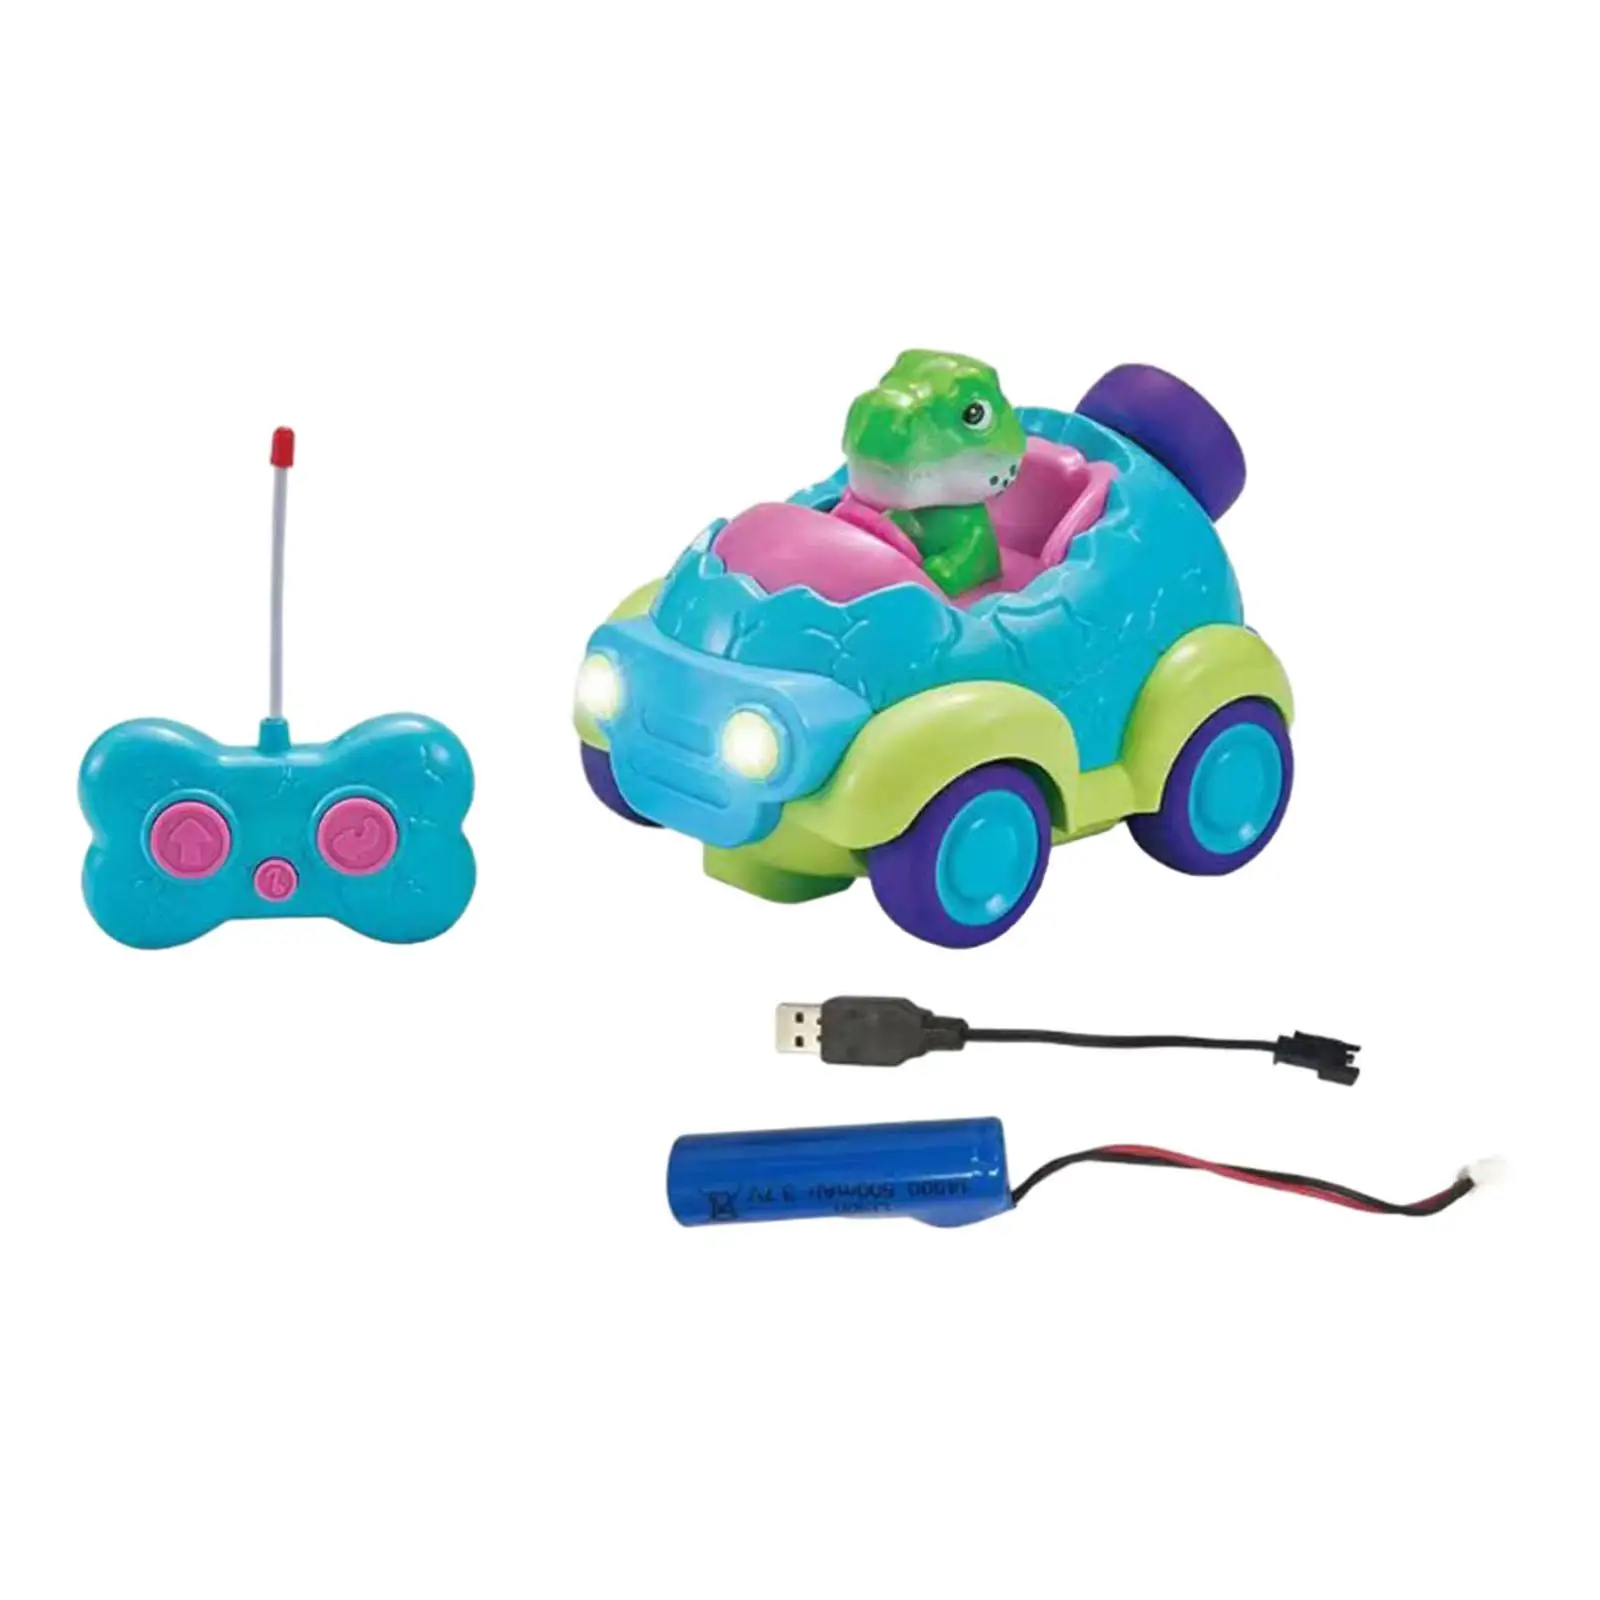 Dino Remote Control Car with LED Light and Music Simulated Dinosaur Toys Remote Control Car Toys for Boys Girls Children Kids